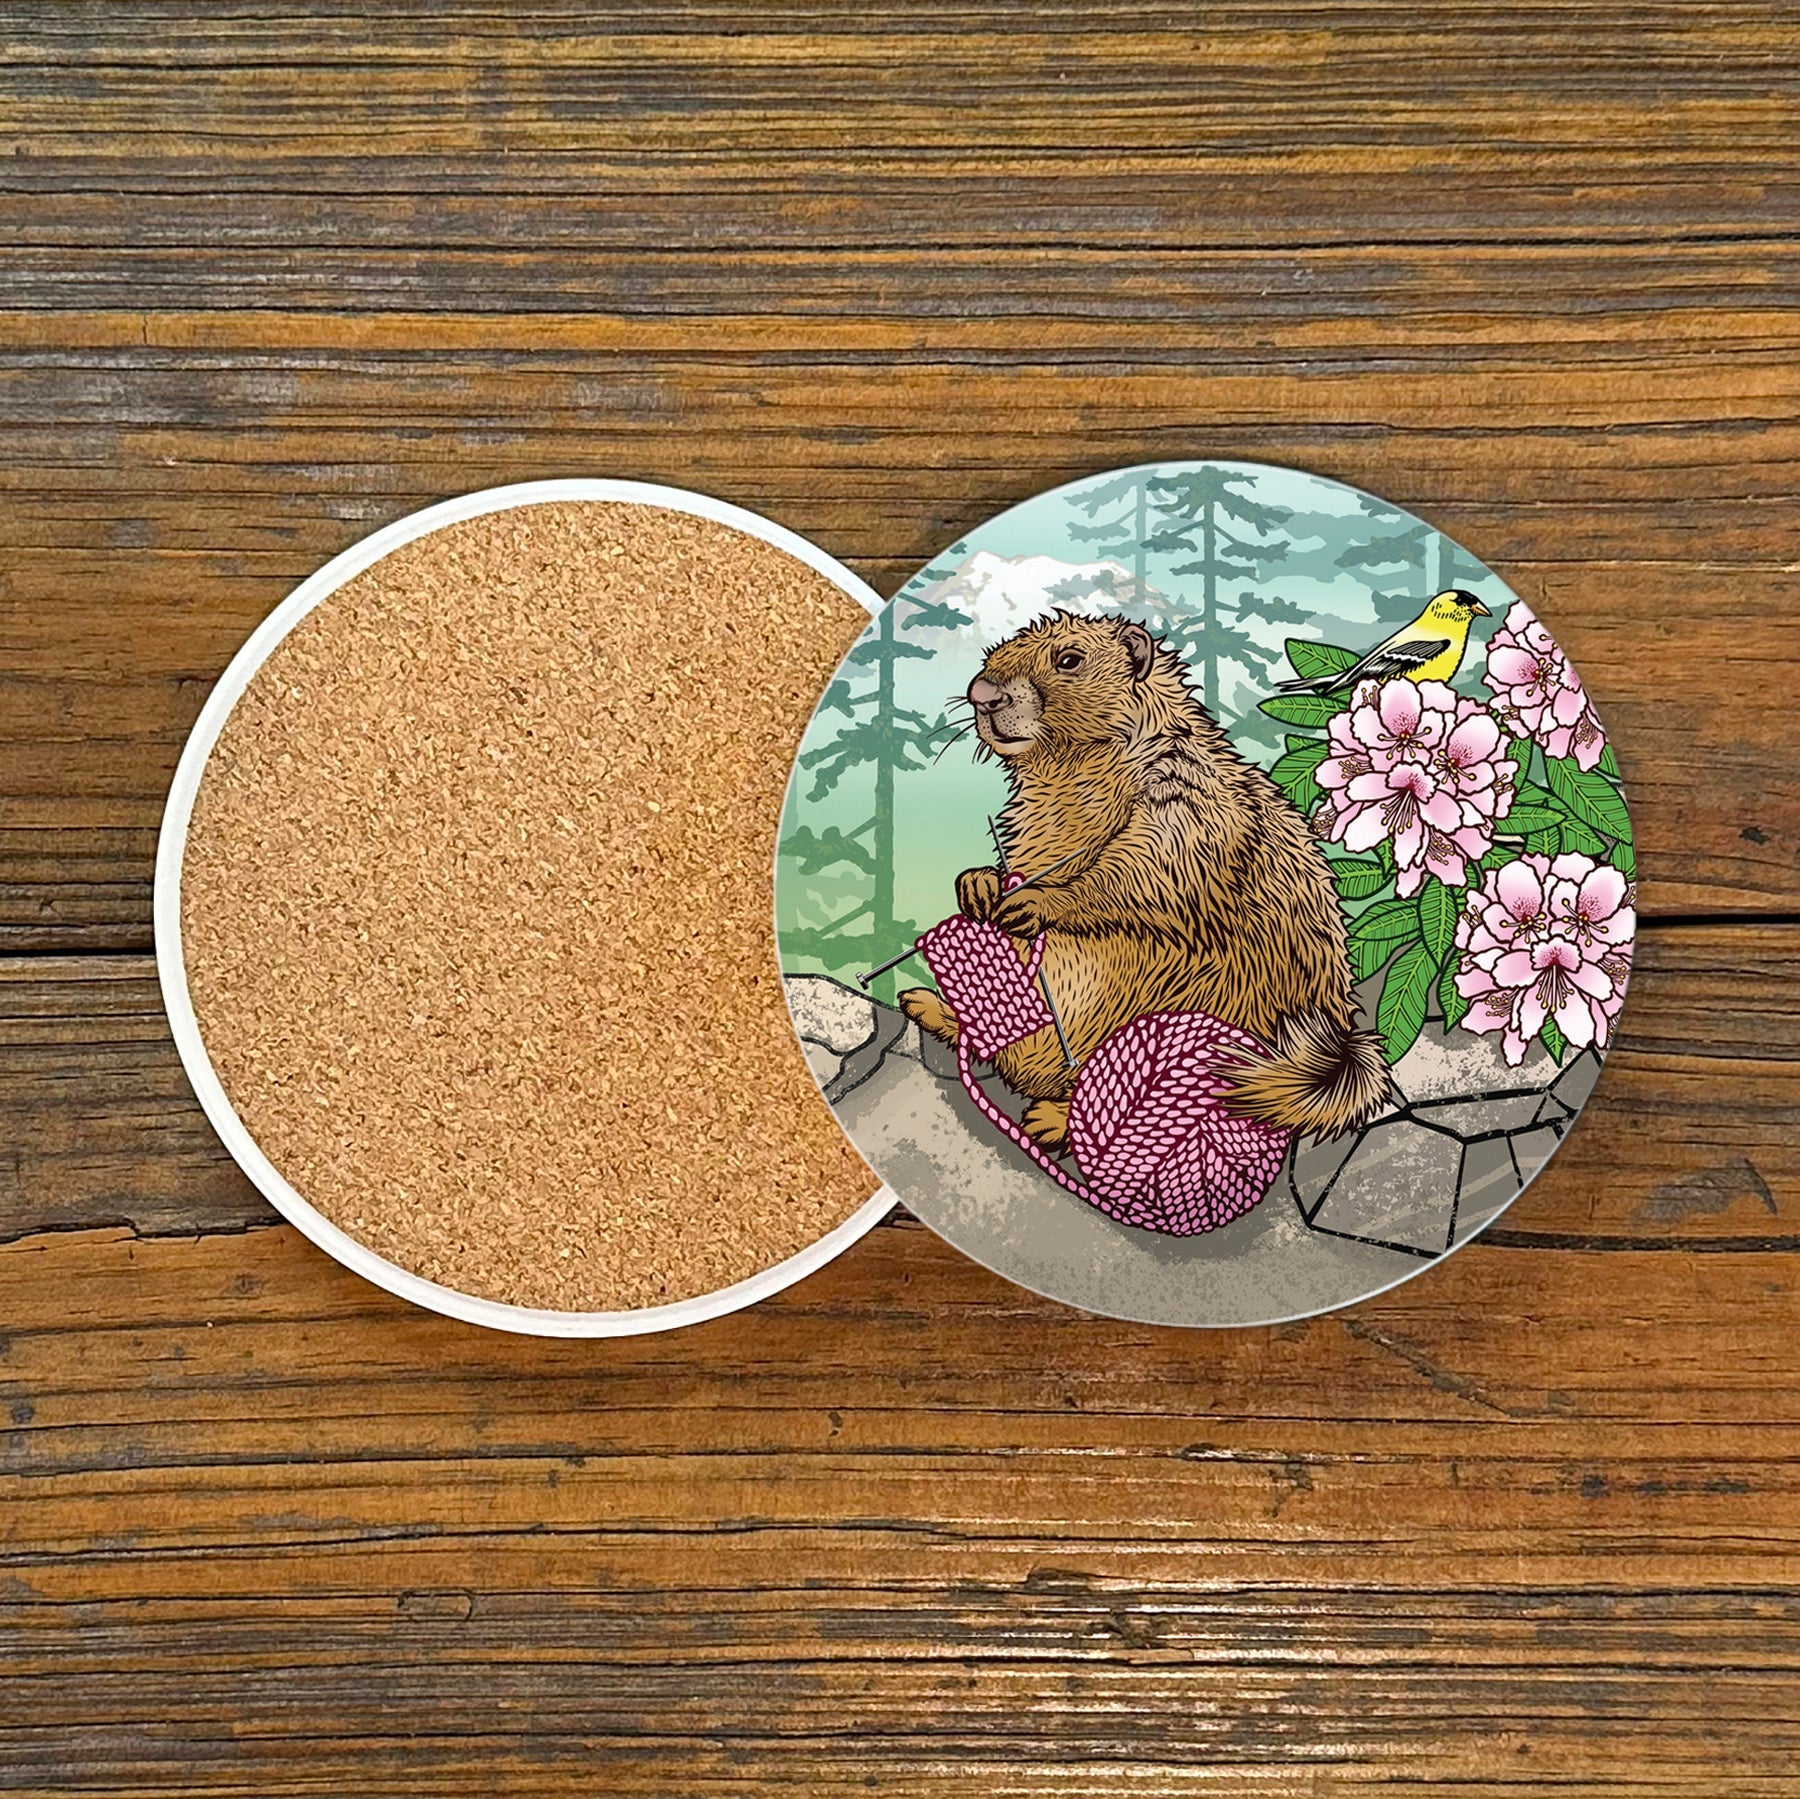 Knitting Marmot Drink Coaster - Two Little Fruits